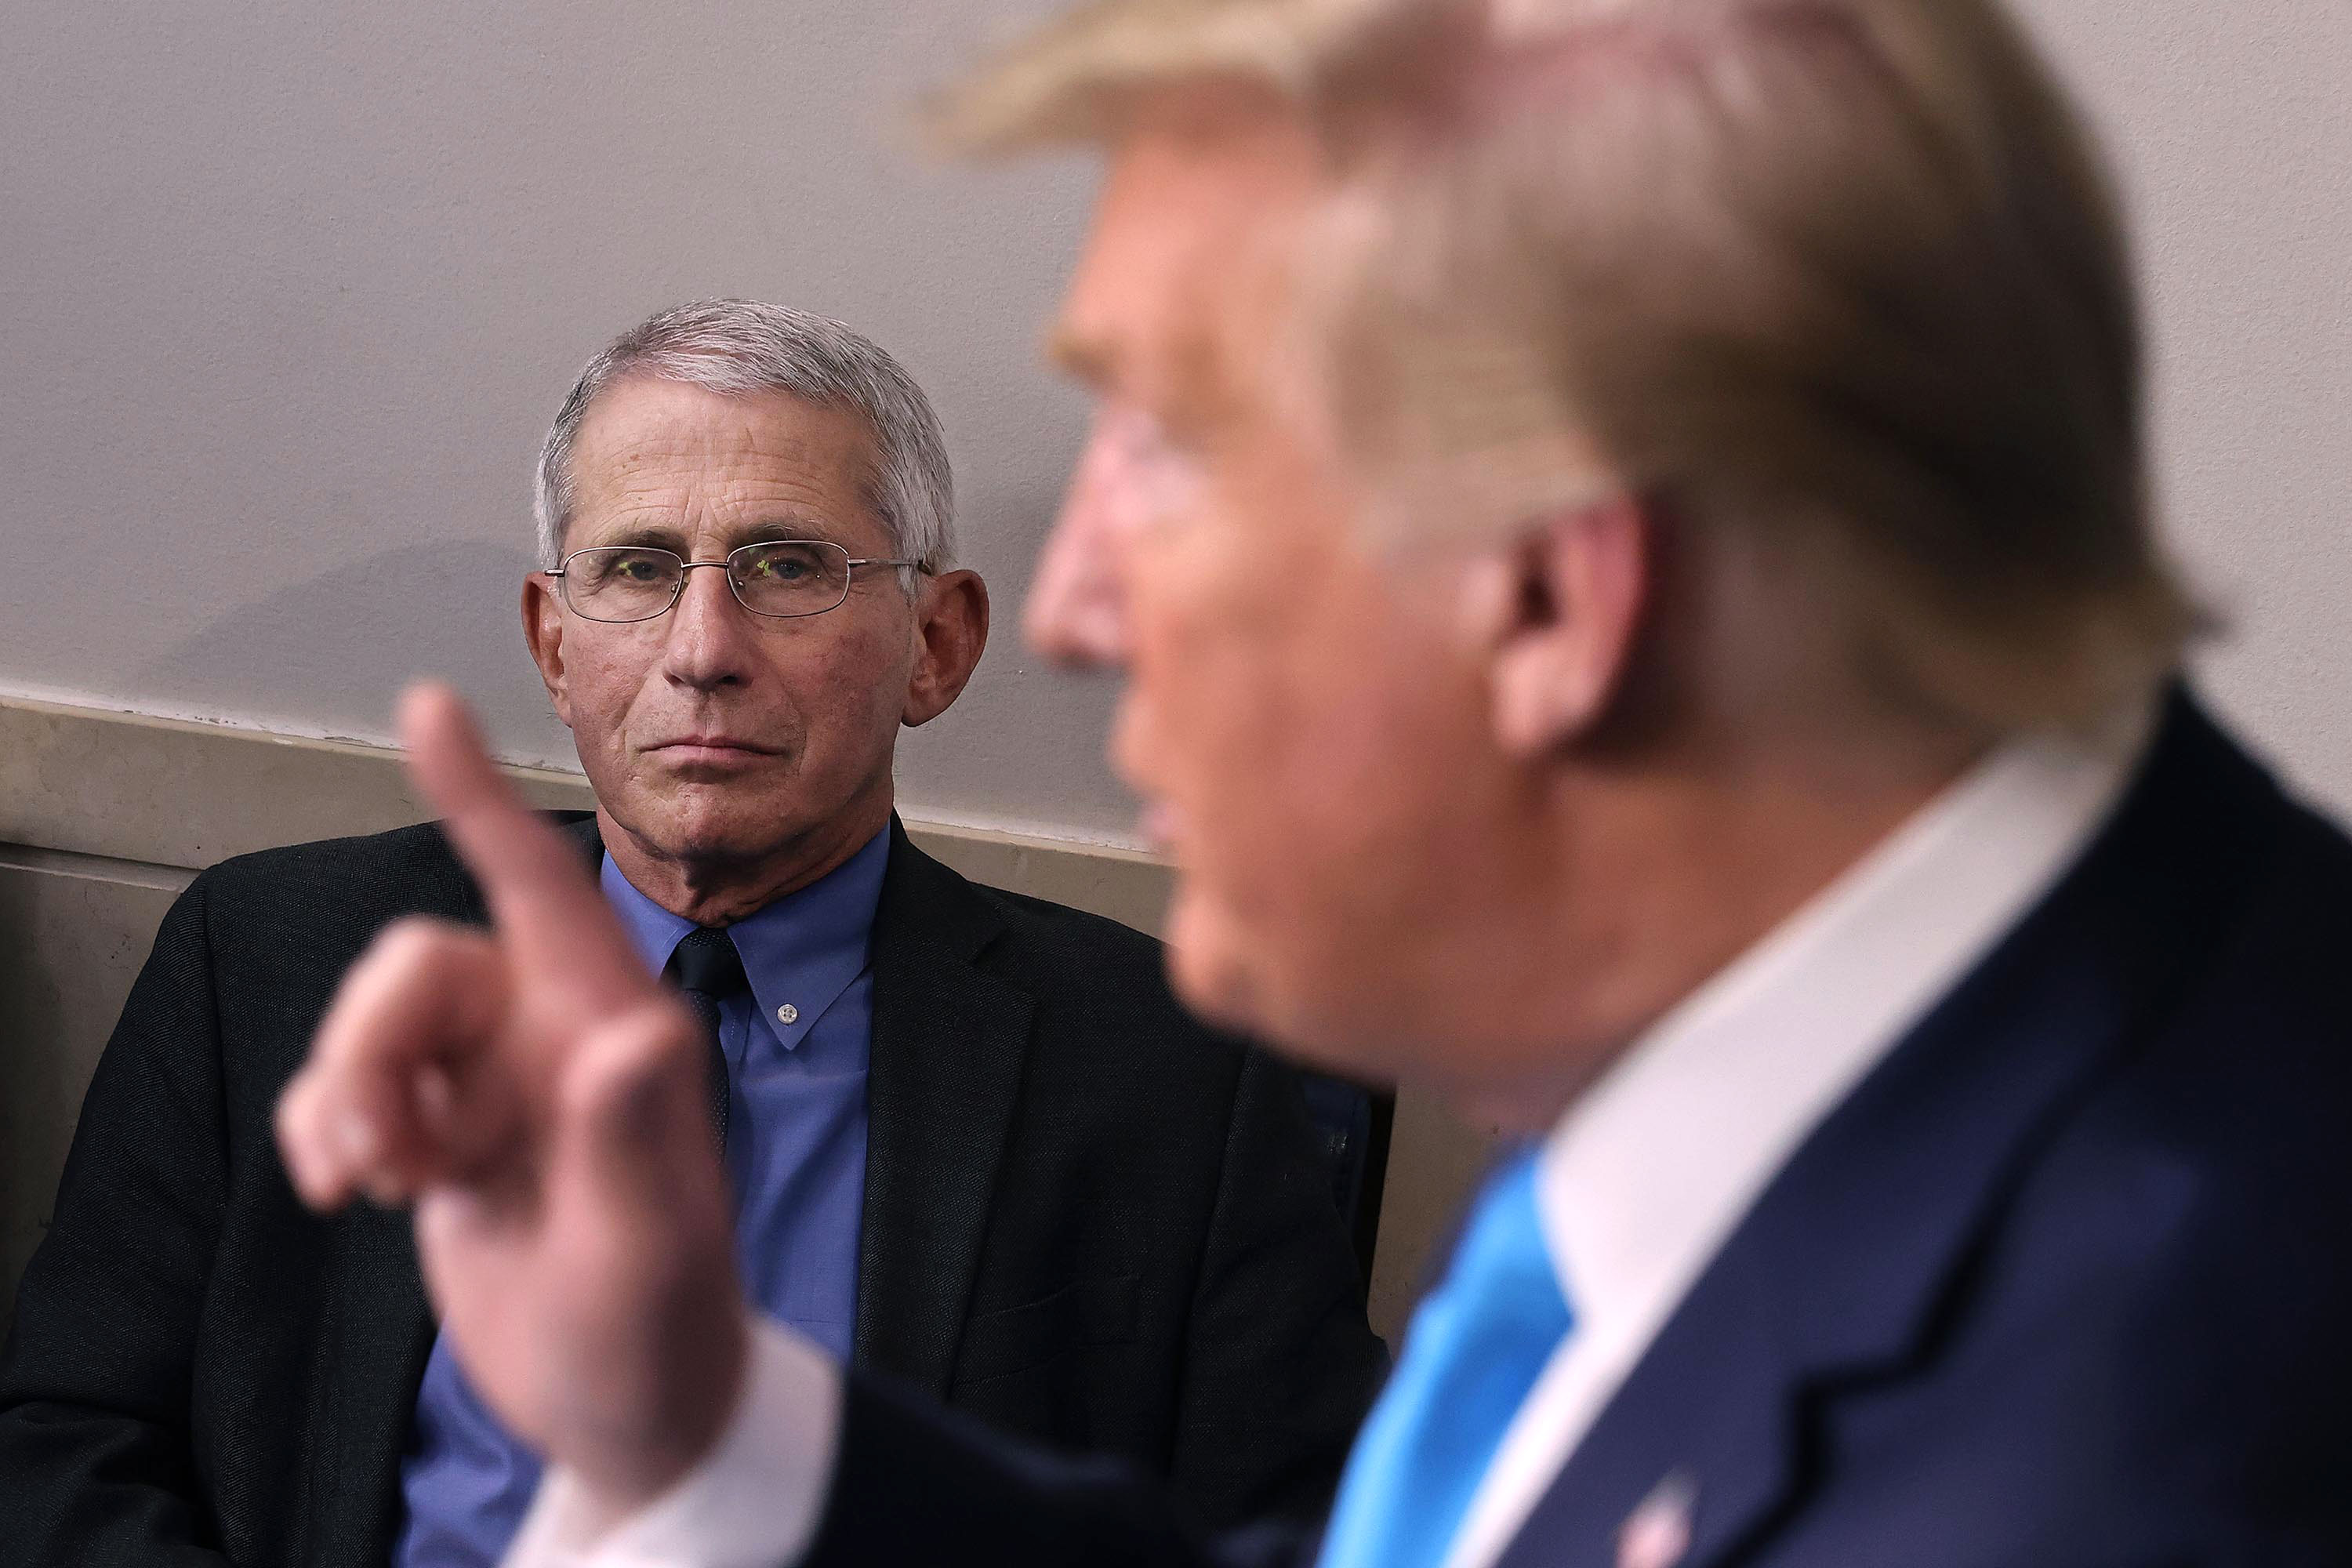 Anthony Fauci, director of the National Institute of Allergy and Infectious Diseases, listens to President Donald Trump speak during a coronavirus task briefing on April 7 in Washington, DC. 